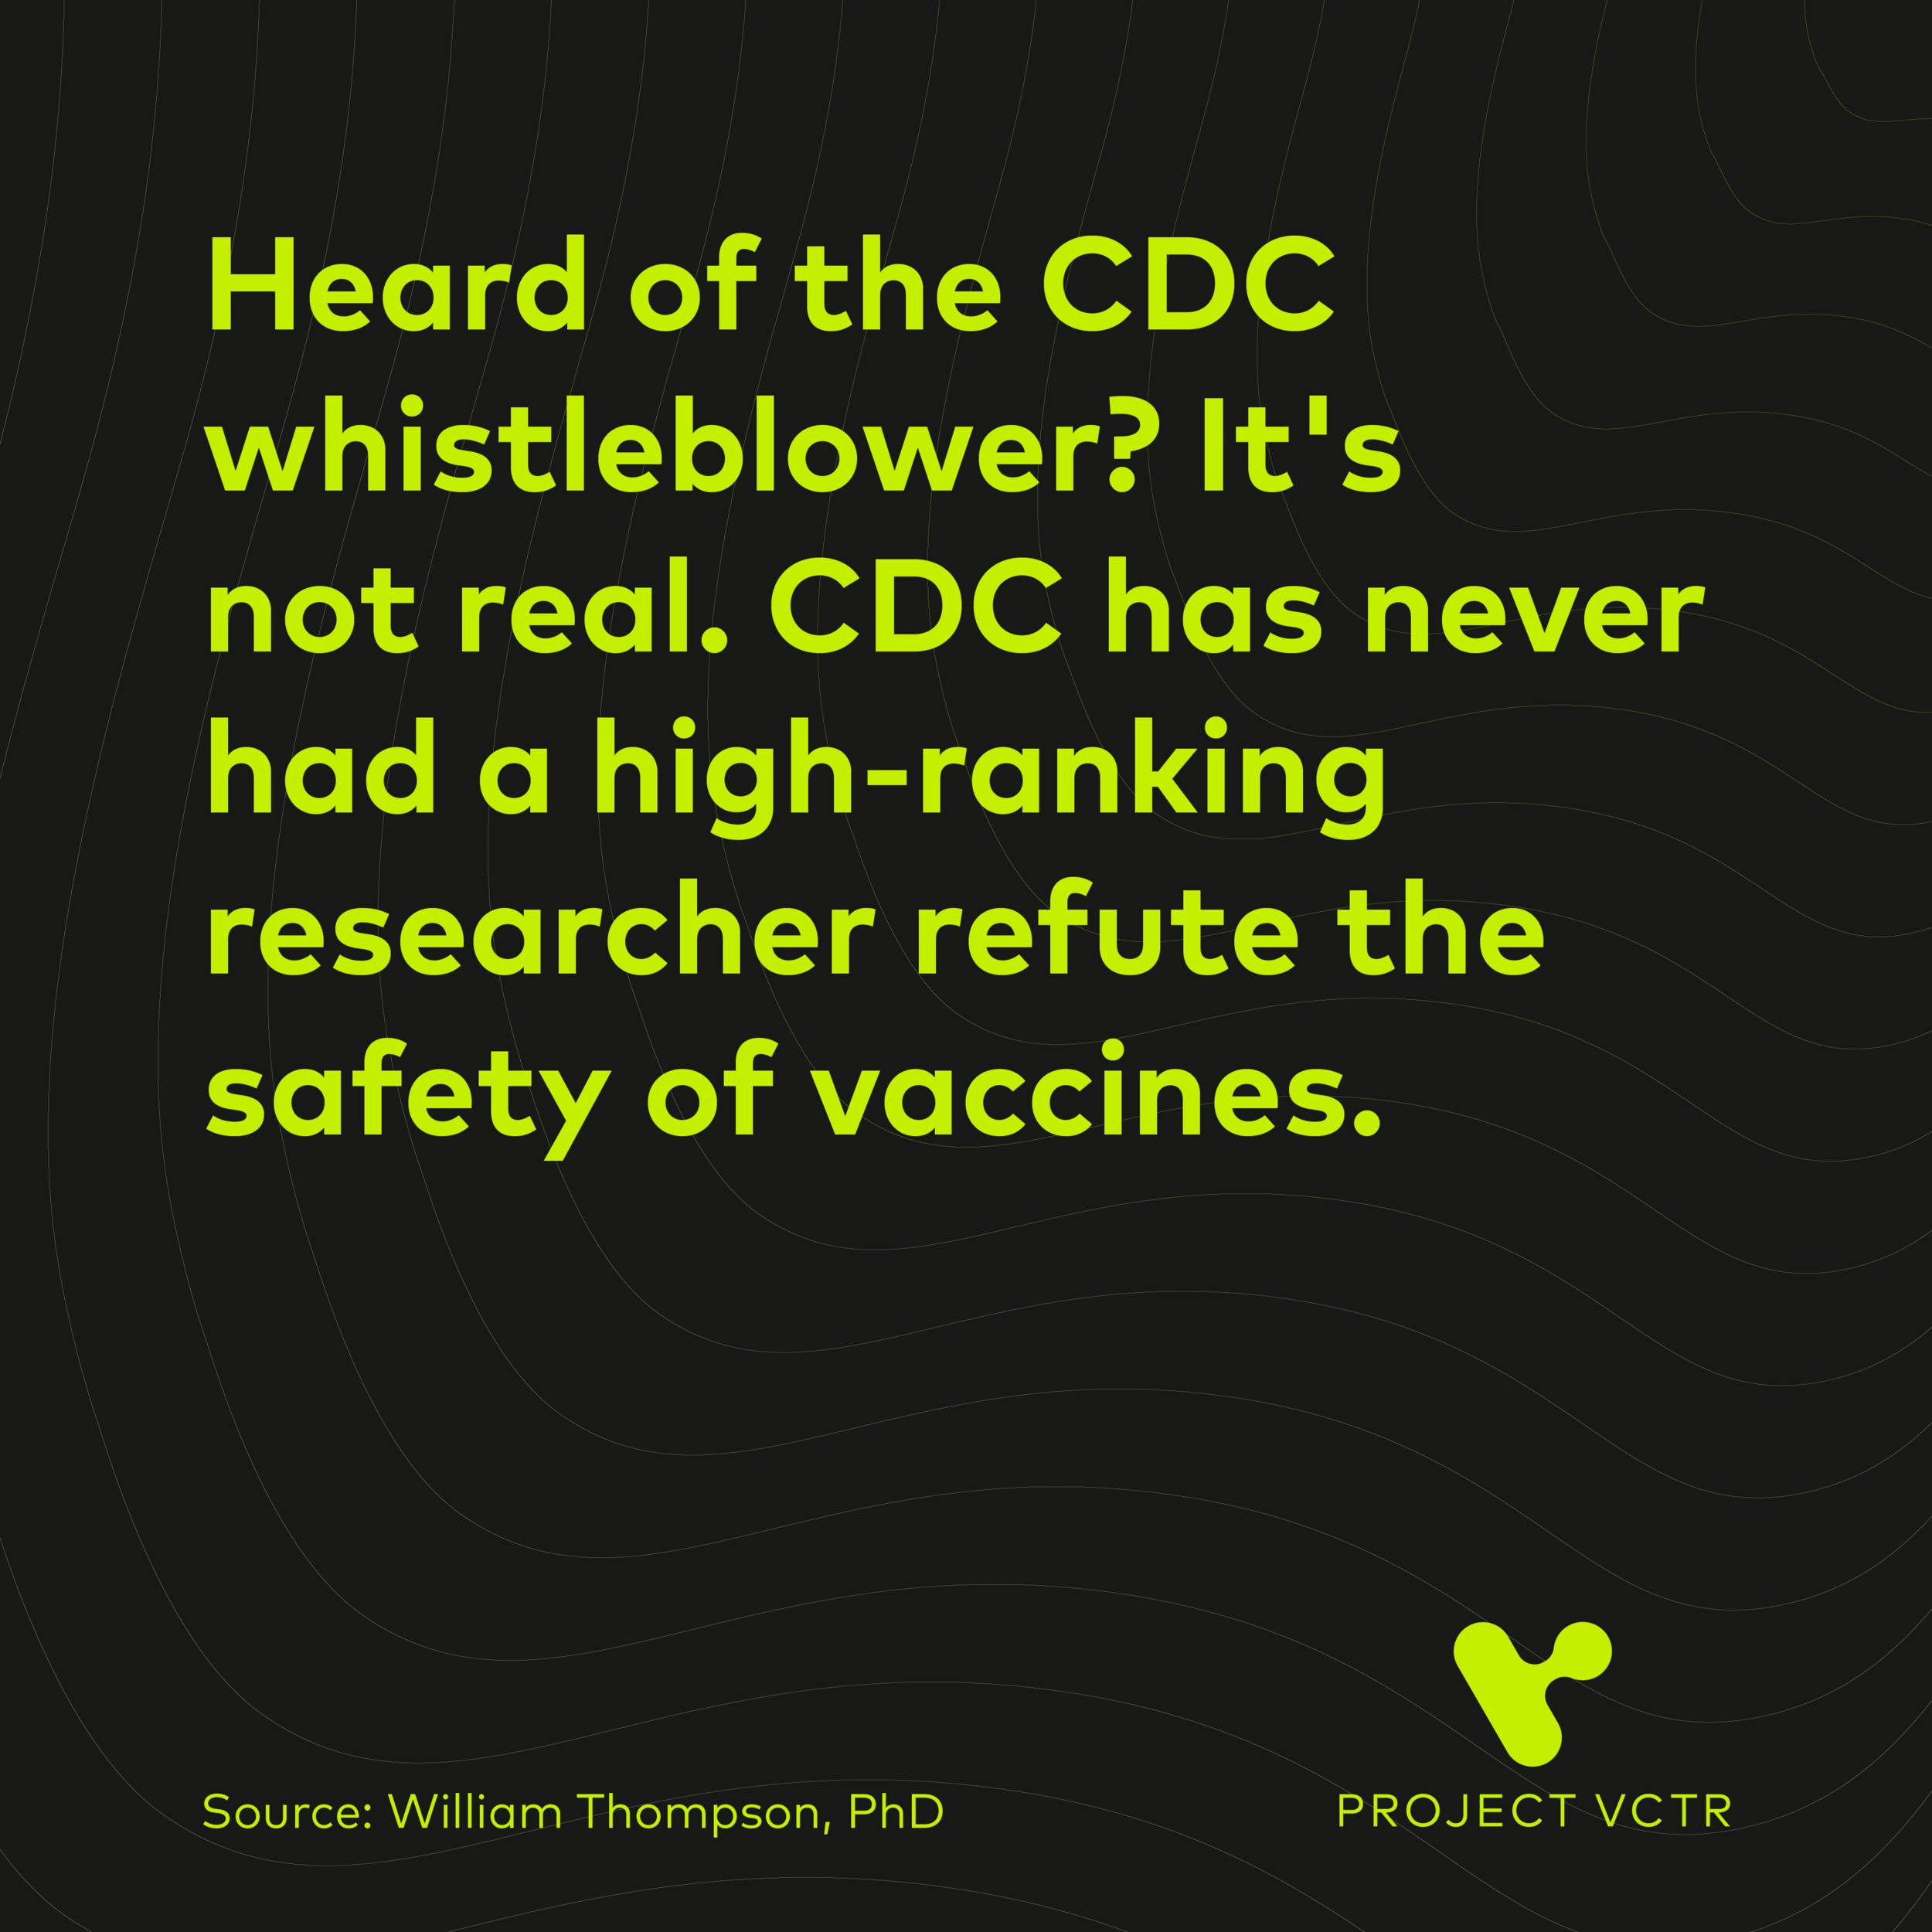 Heard of the CDC whistleblower? It's not real. CDC has never had a high-ranking researcher refute the safety of vaccines.